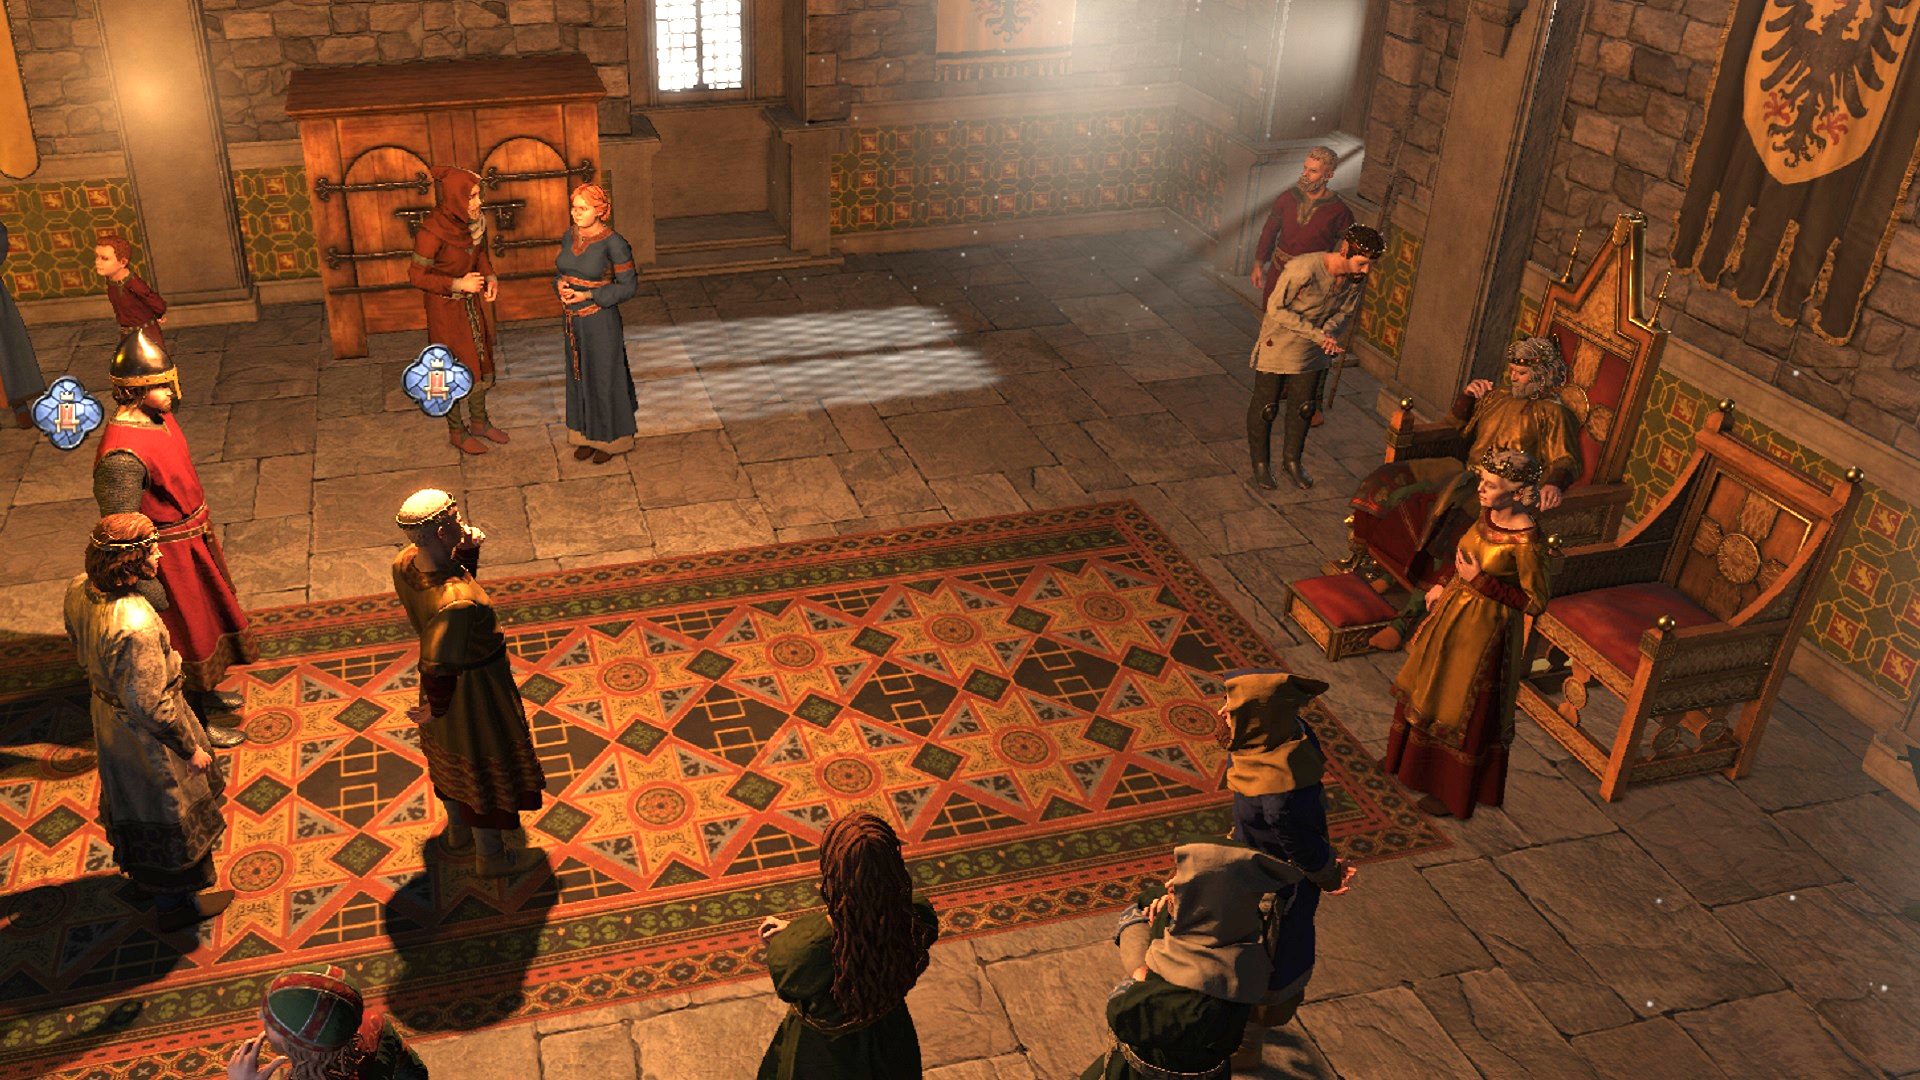 Here’s a deeper look at Crusader Kings 3’s new throne room mechanics